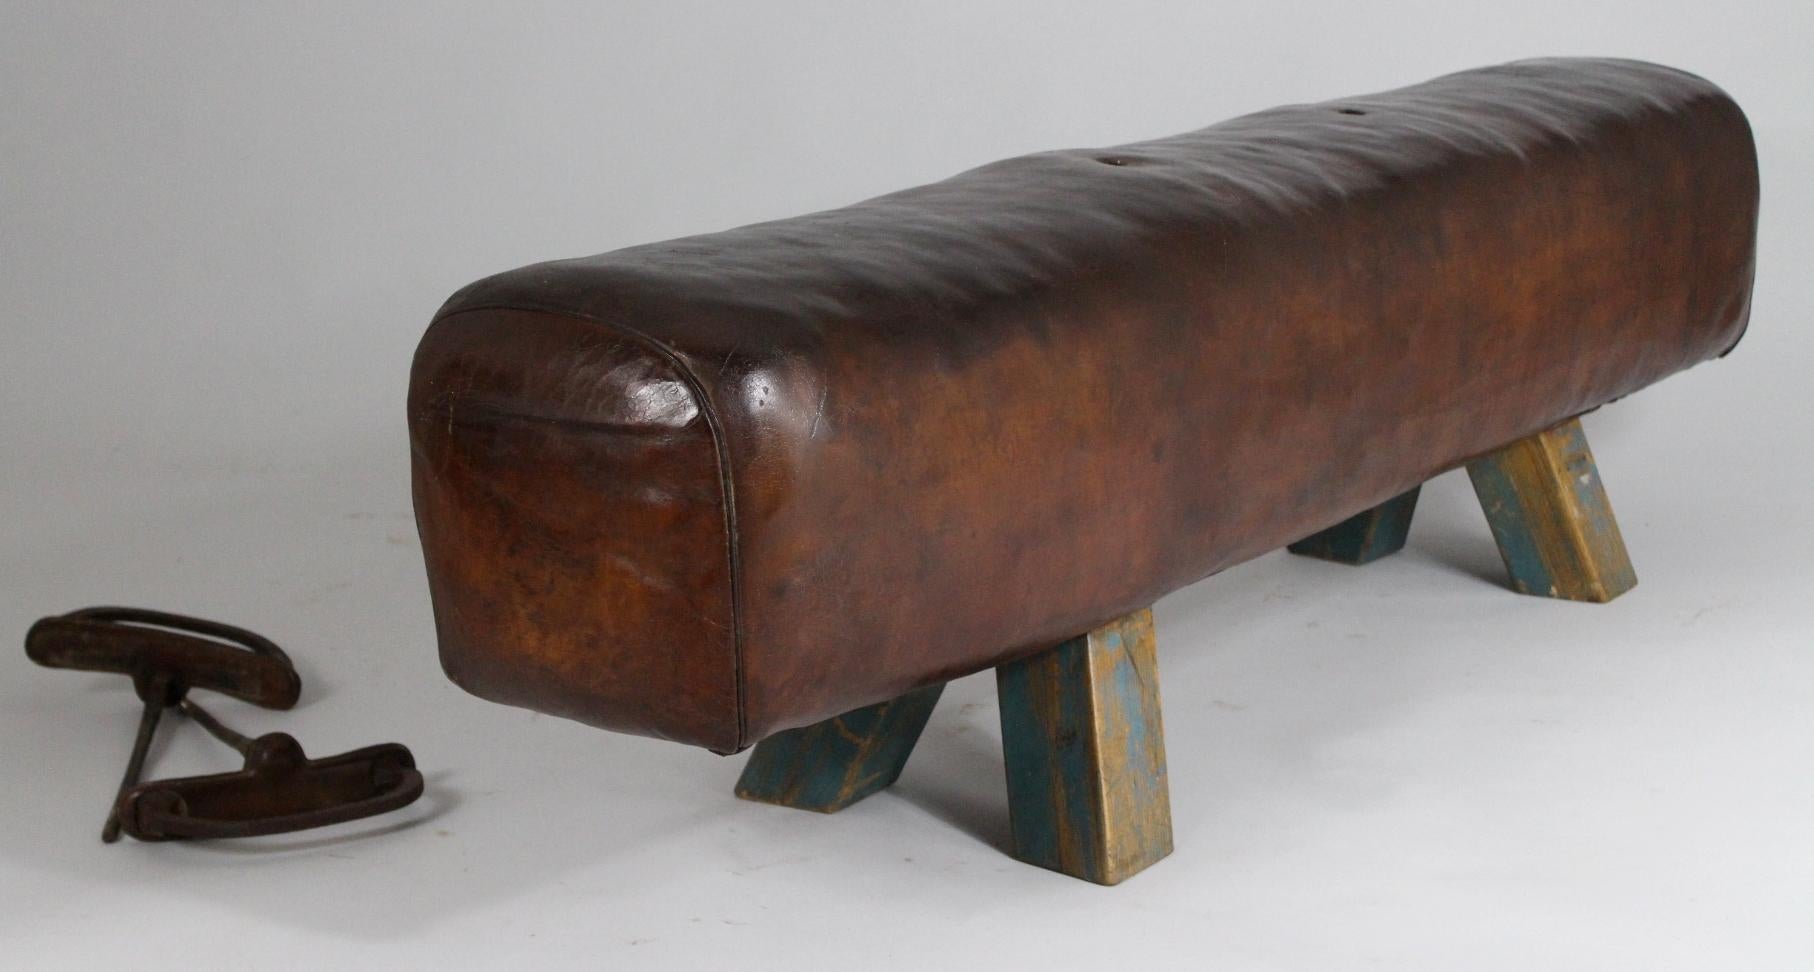 Industrial 1920s Leather Gym Pommel Horse / Bench